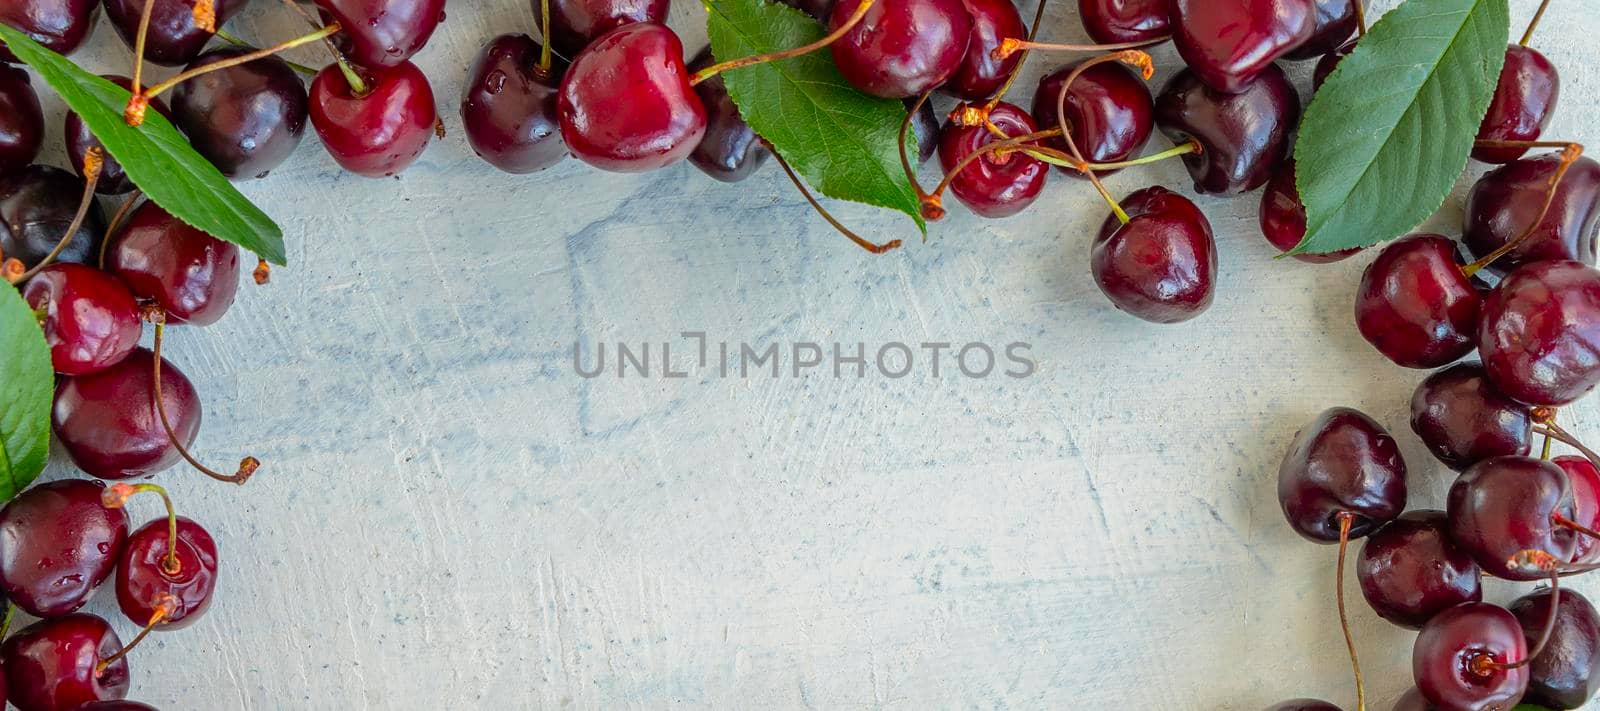 banner with frame of sweet juicy cherries on white textured background. flat laying of ripe cherries. Healthy sweets concept. by Leoschka